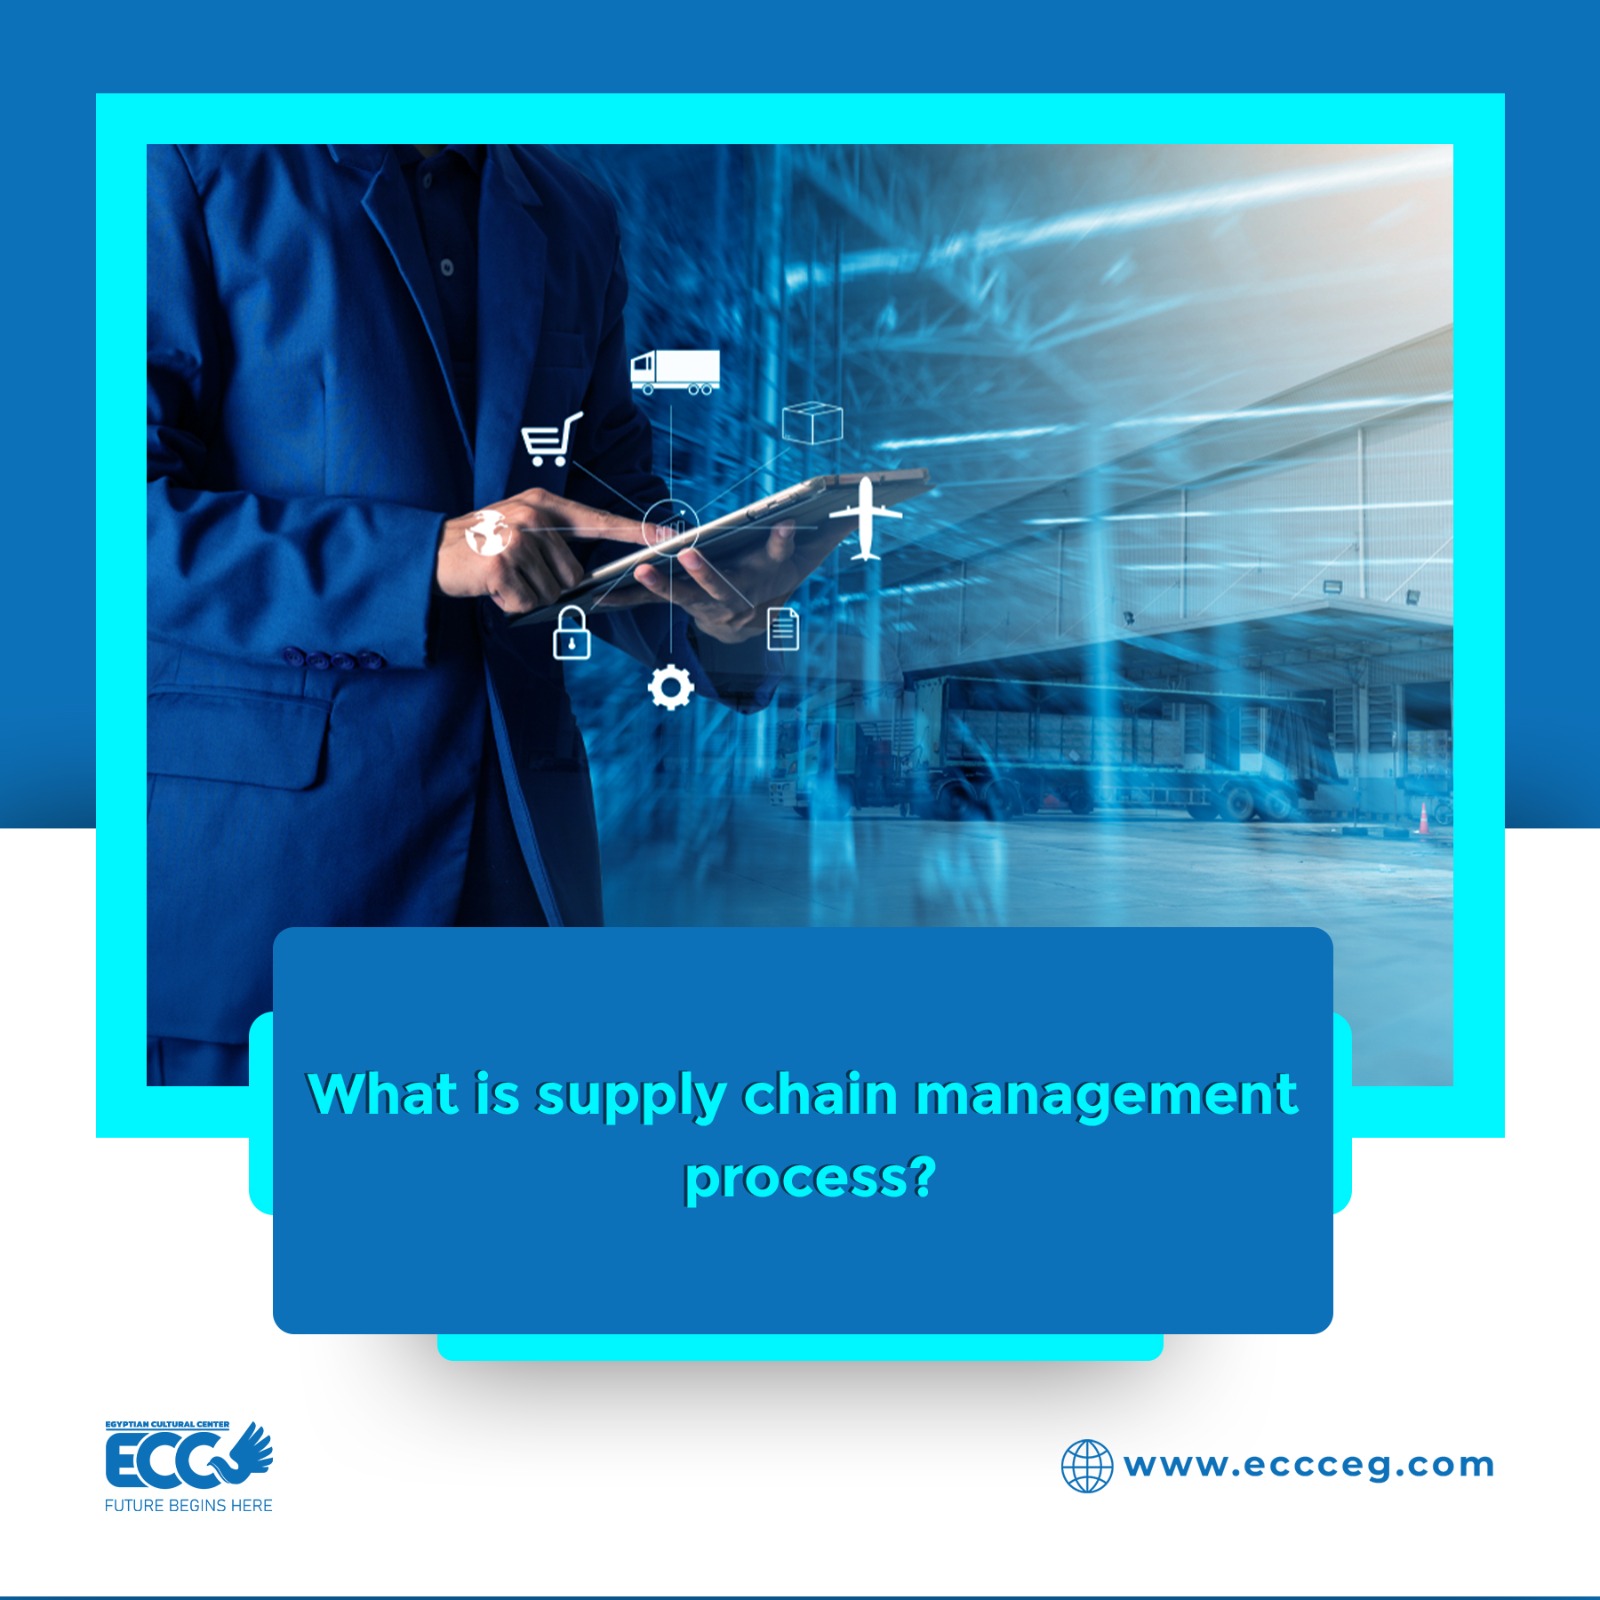 Supply chain management process